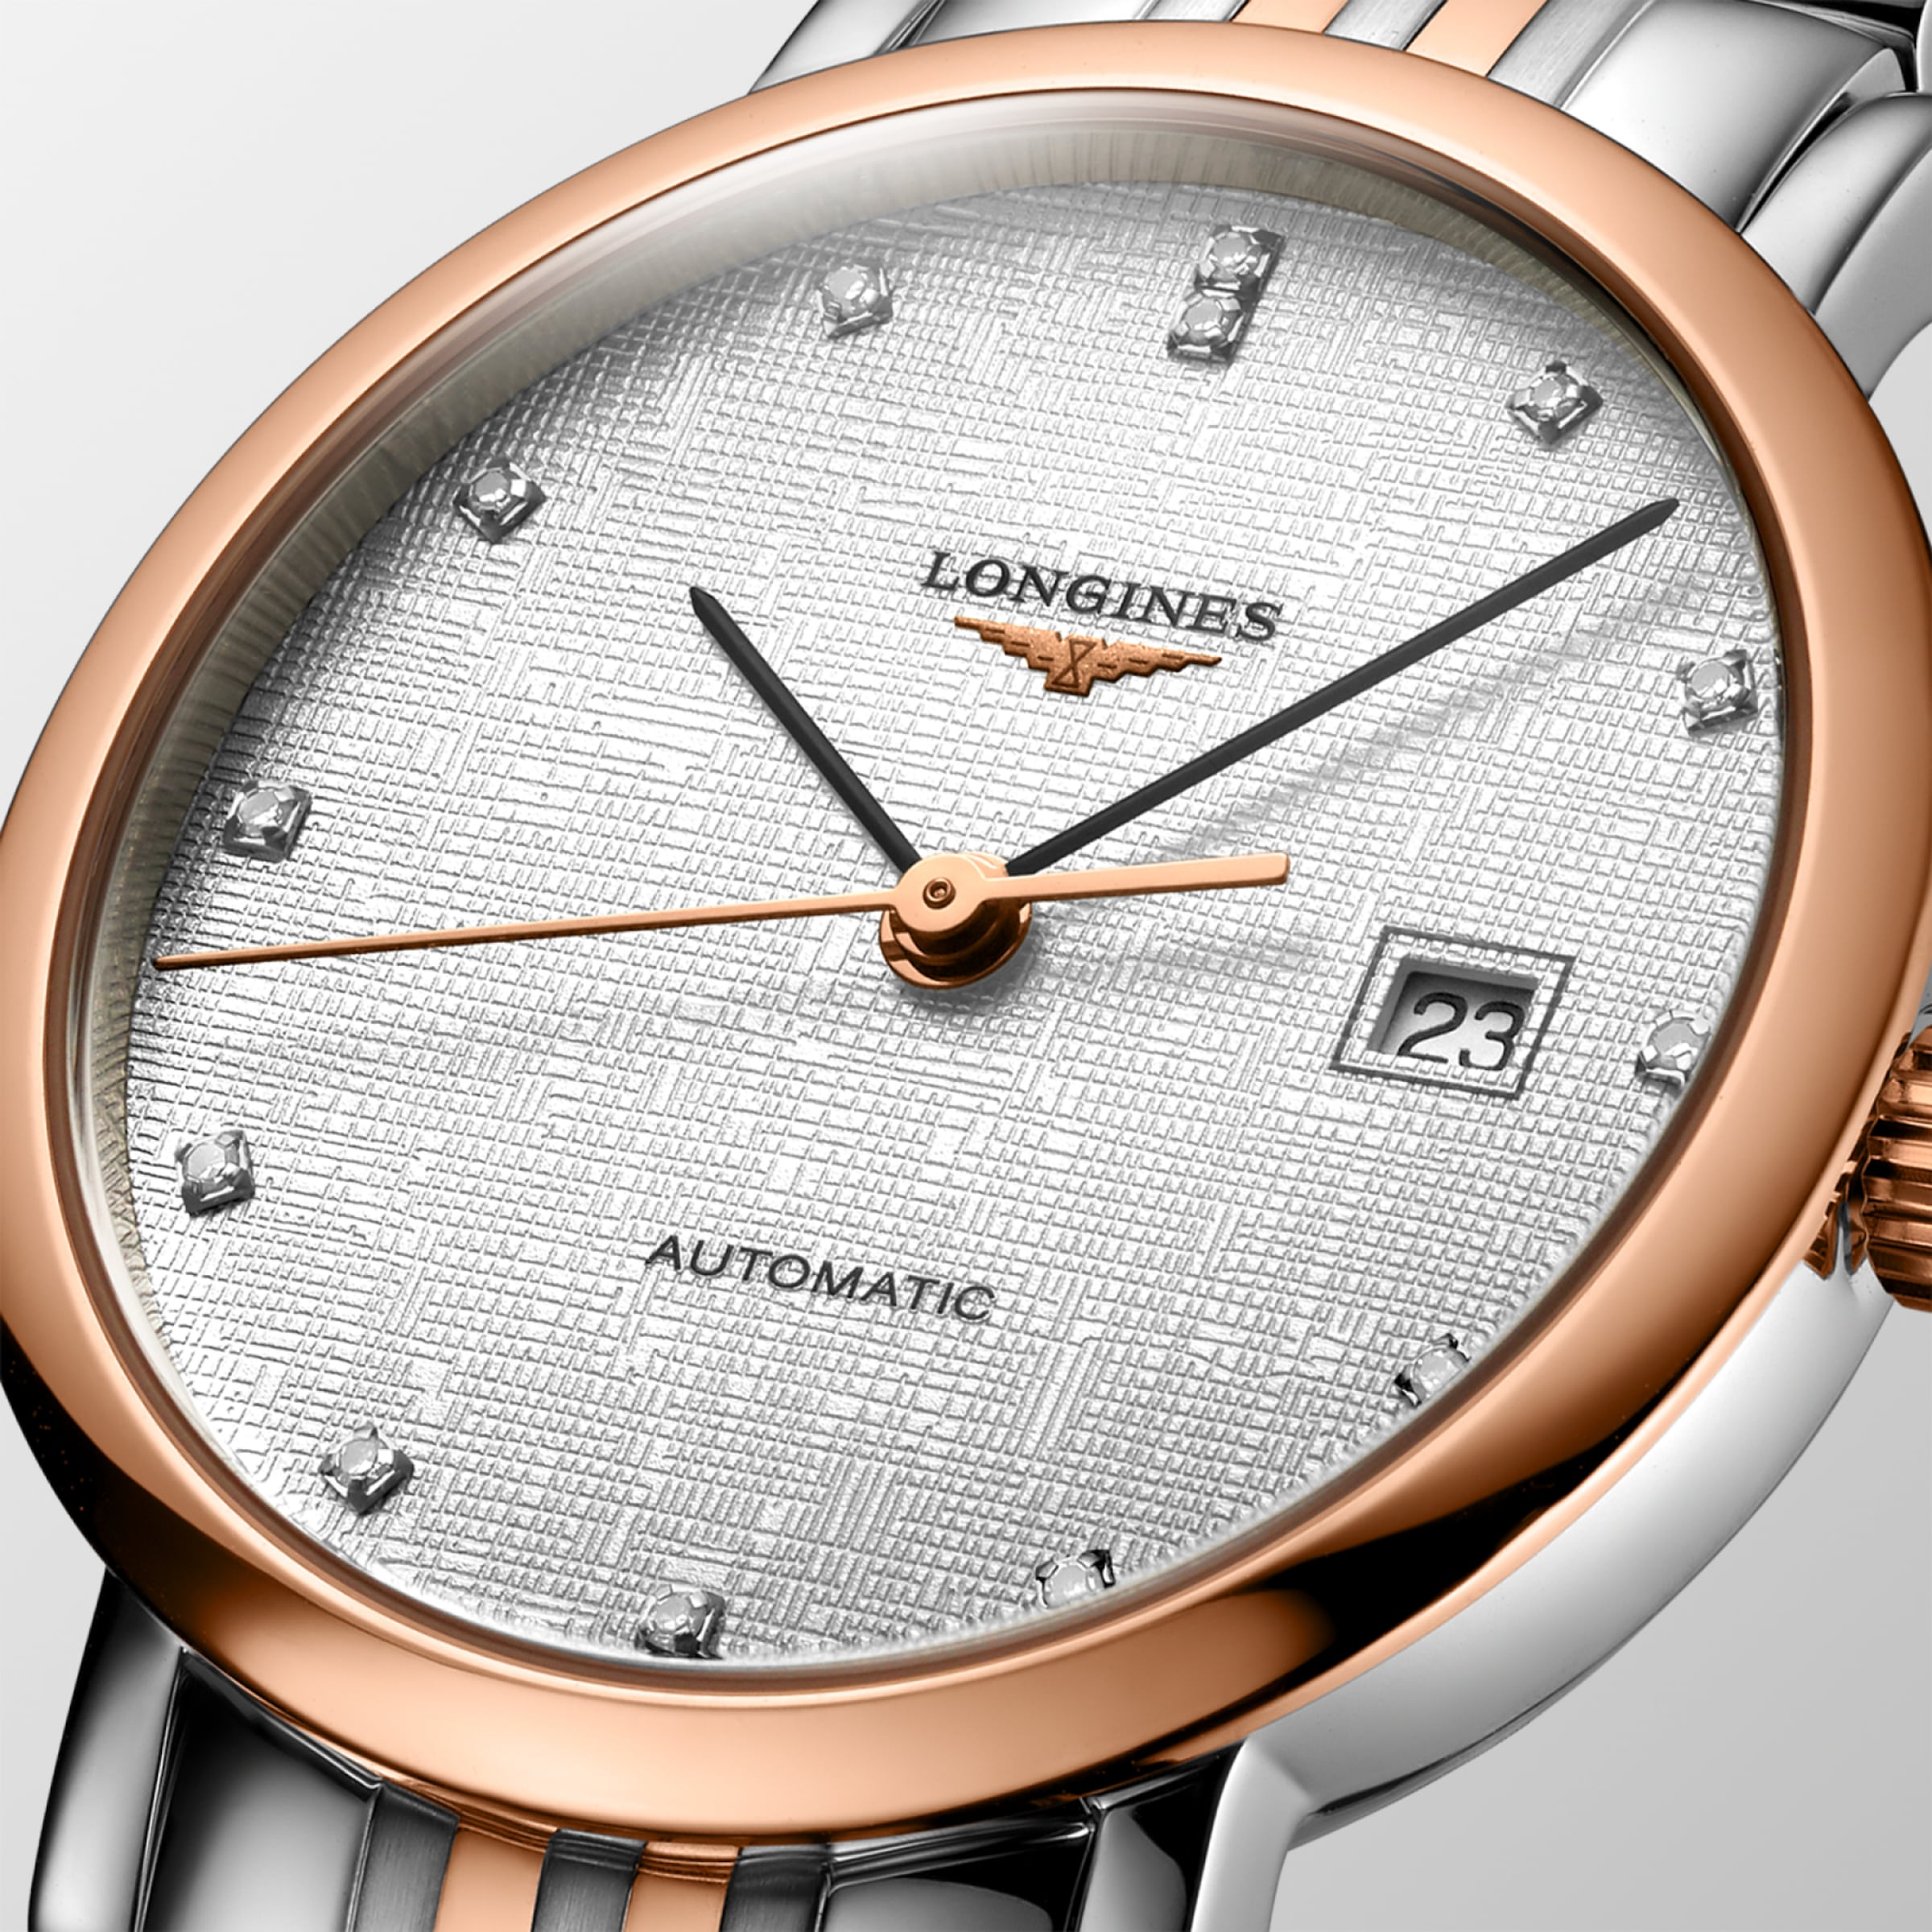 Longines ELEGANT COLLECTION Automatic Stainless steel and 18 karat pink gold cap 200 Watch - L4.310.5.77.7